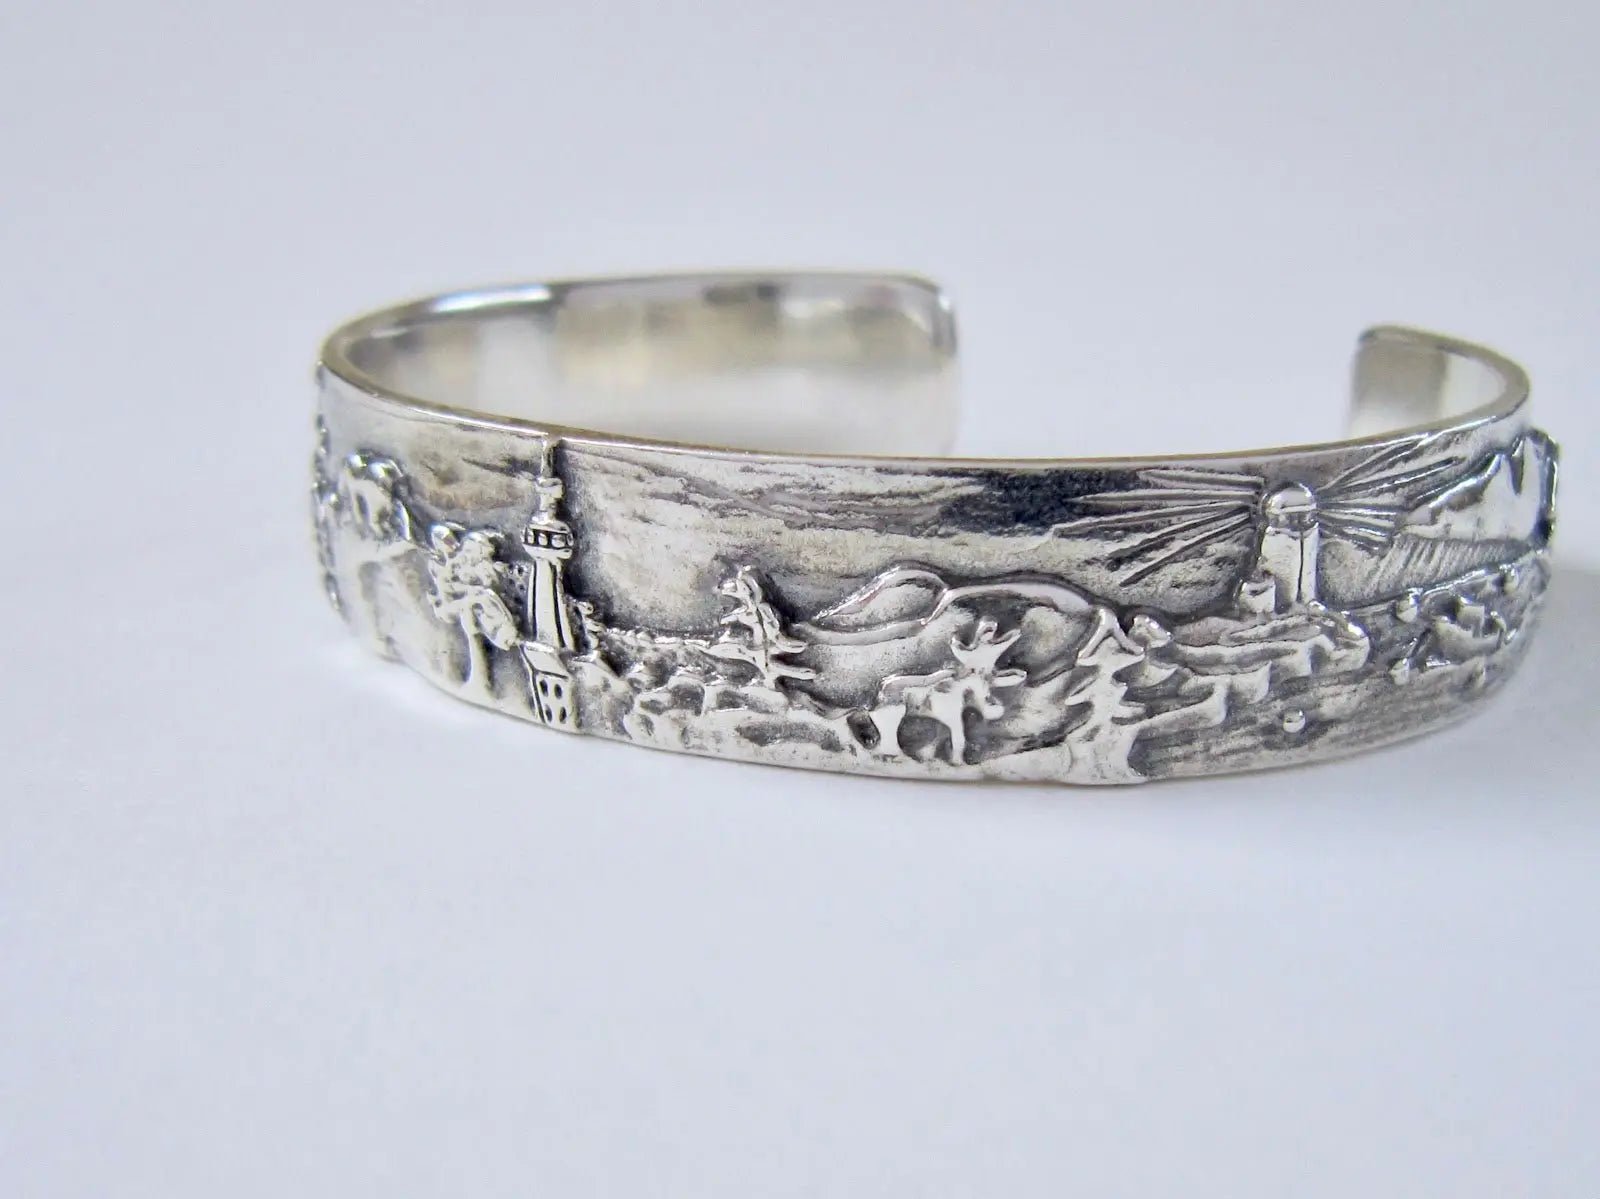 Designer Feature: 'O Canada' Silver Jewellery Collection by Charmed & Cherished - Hart & Hive